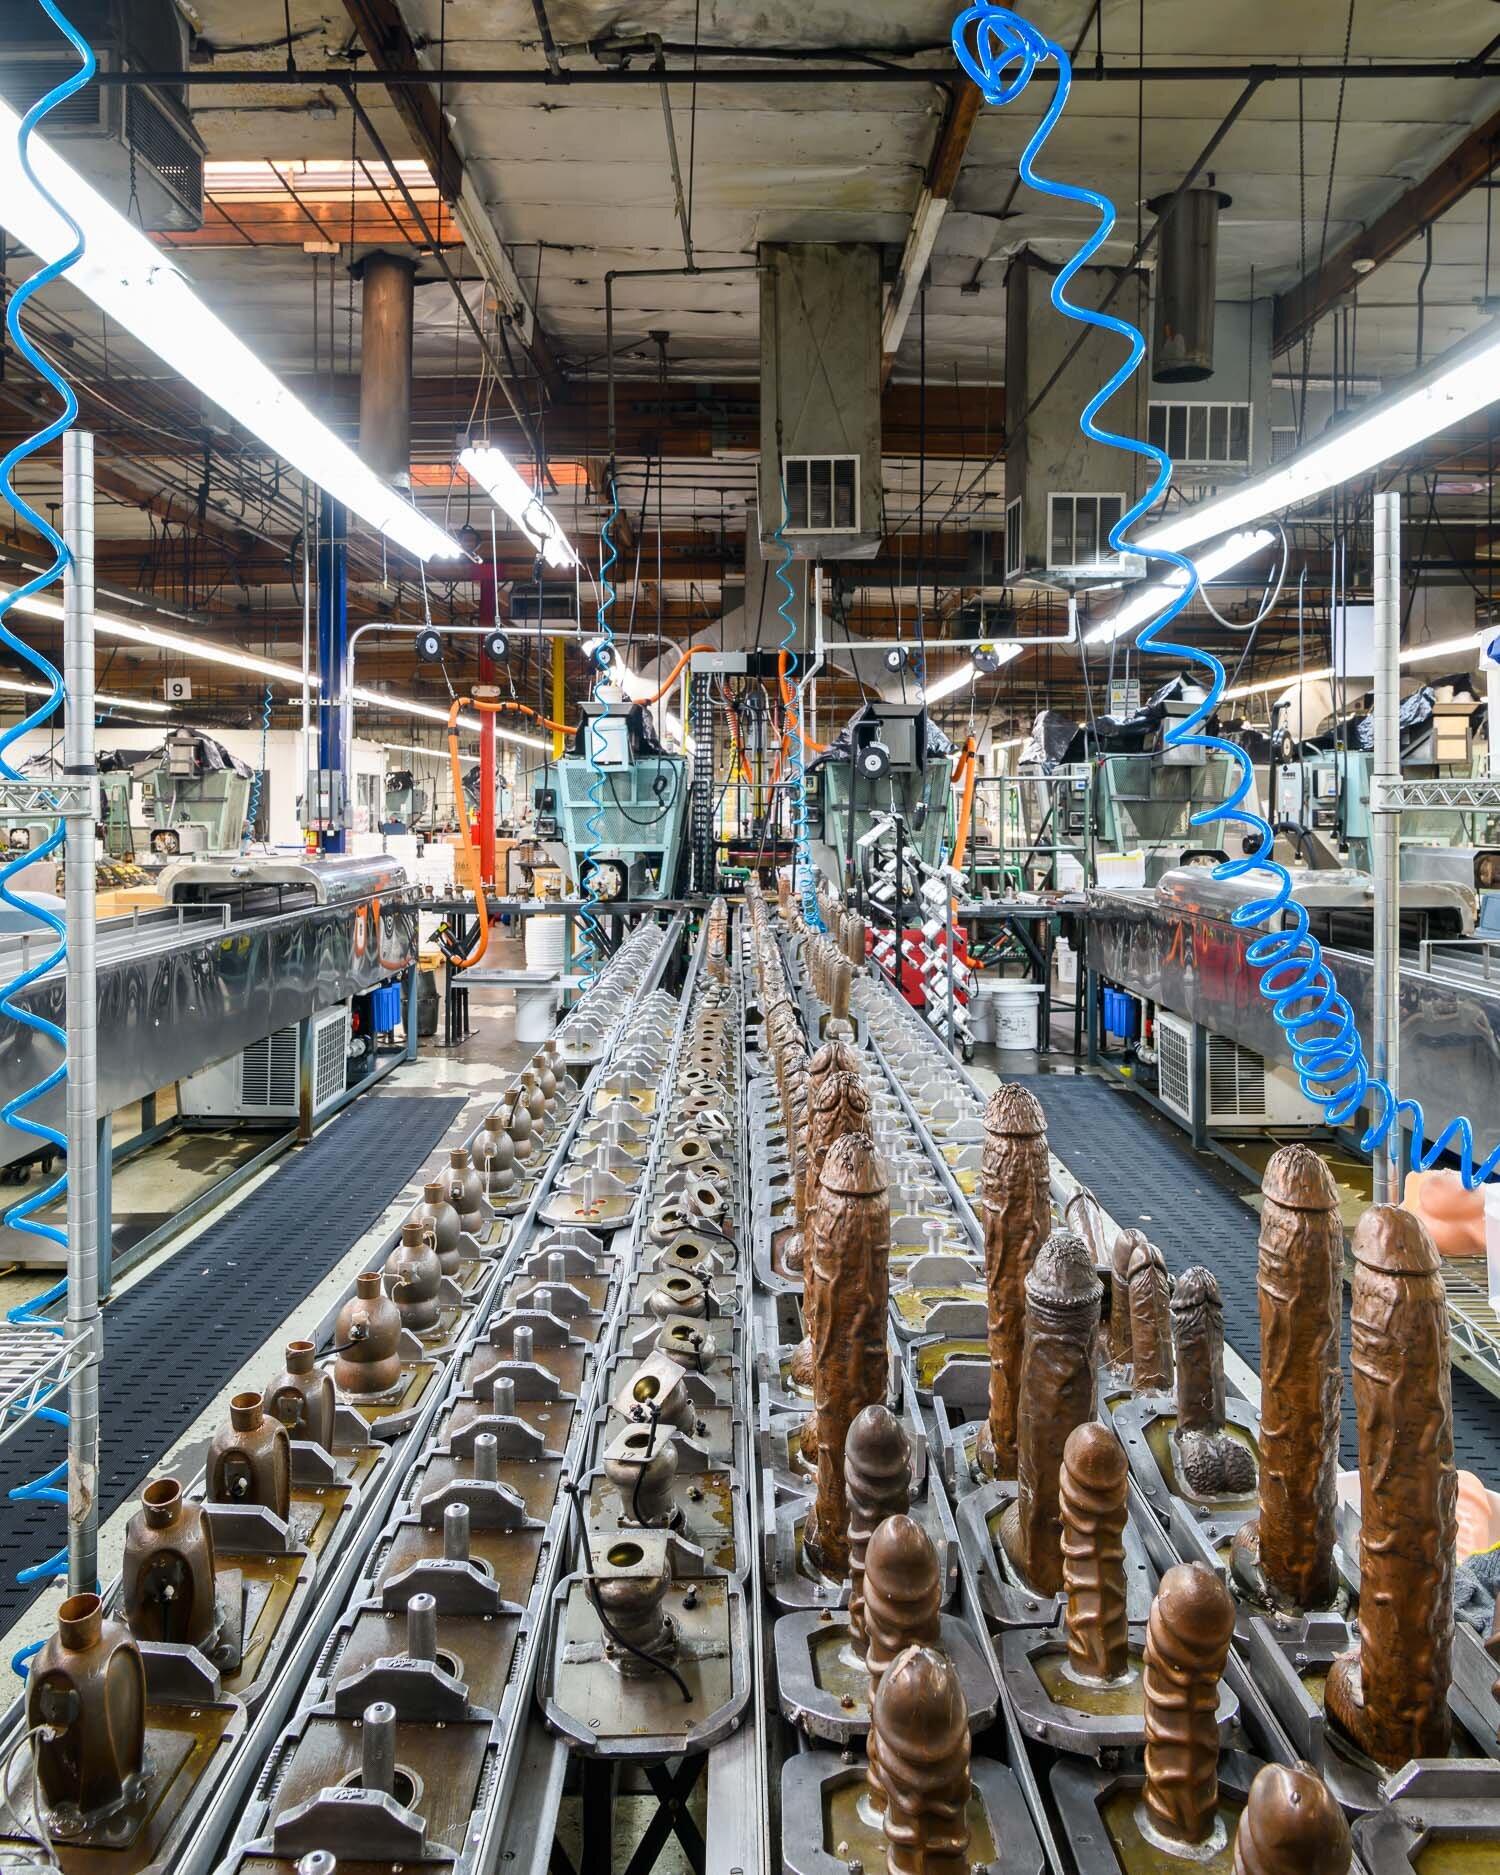  The factory floor at Doc Johnson in Los Angeles.   “It’s a family business,” explains Chad Braverman, whose father Ron started the business in 1976. "I wasn't really aware of what my family did for a living for a really long time,” says Chad. "I thi